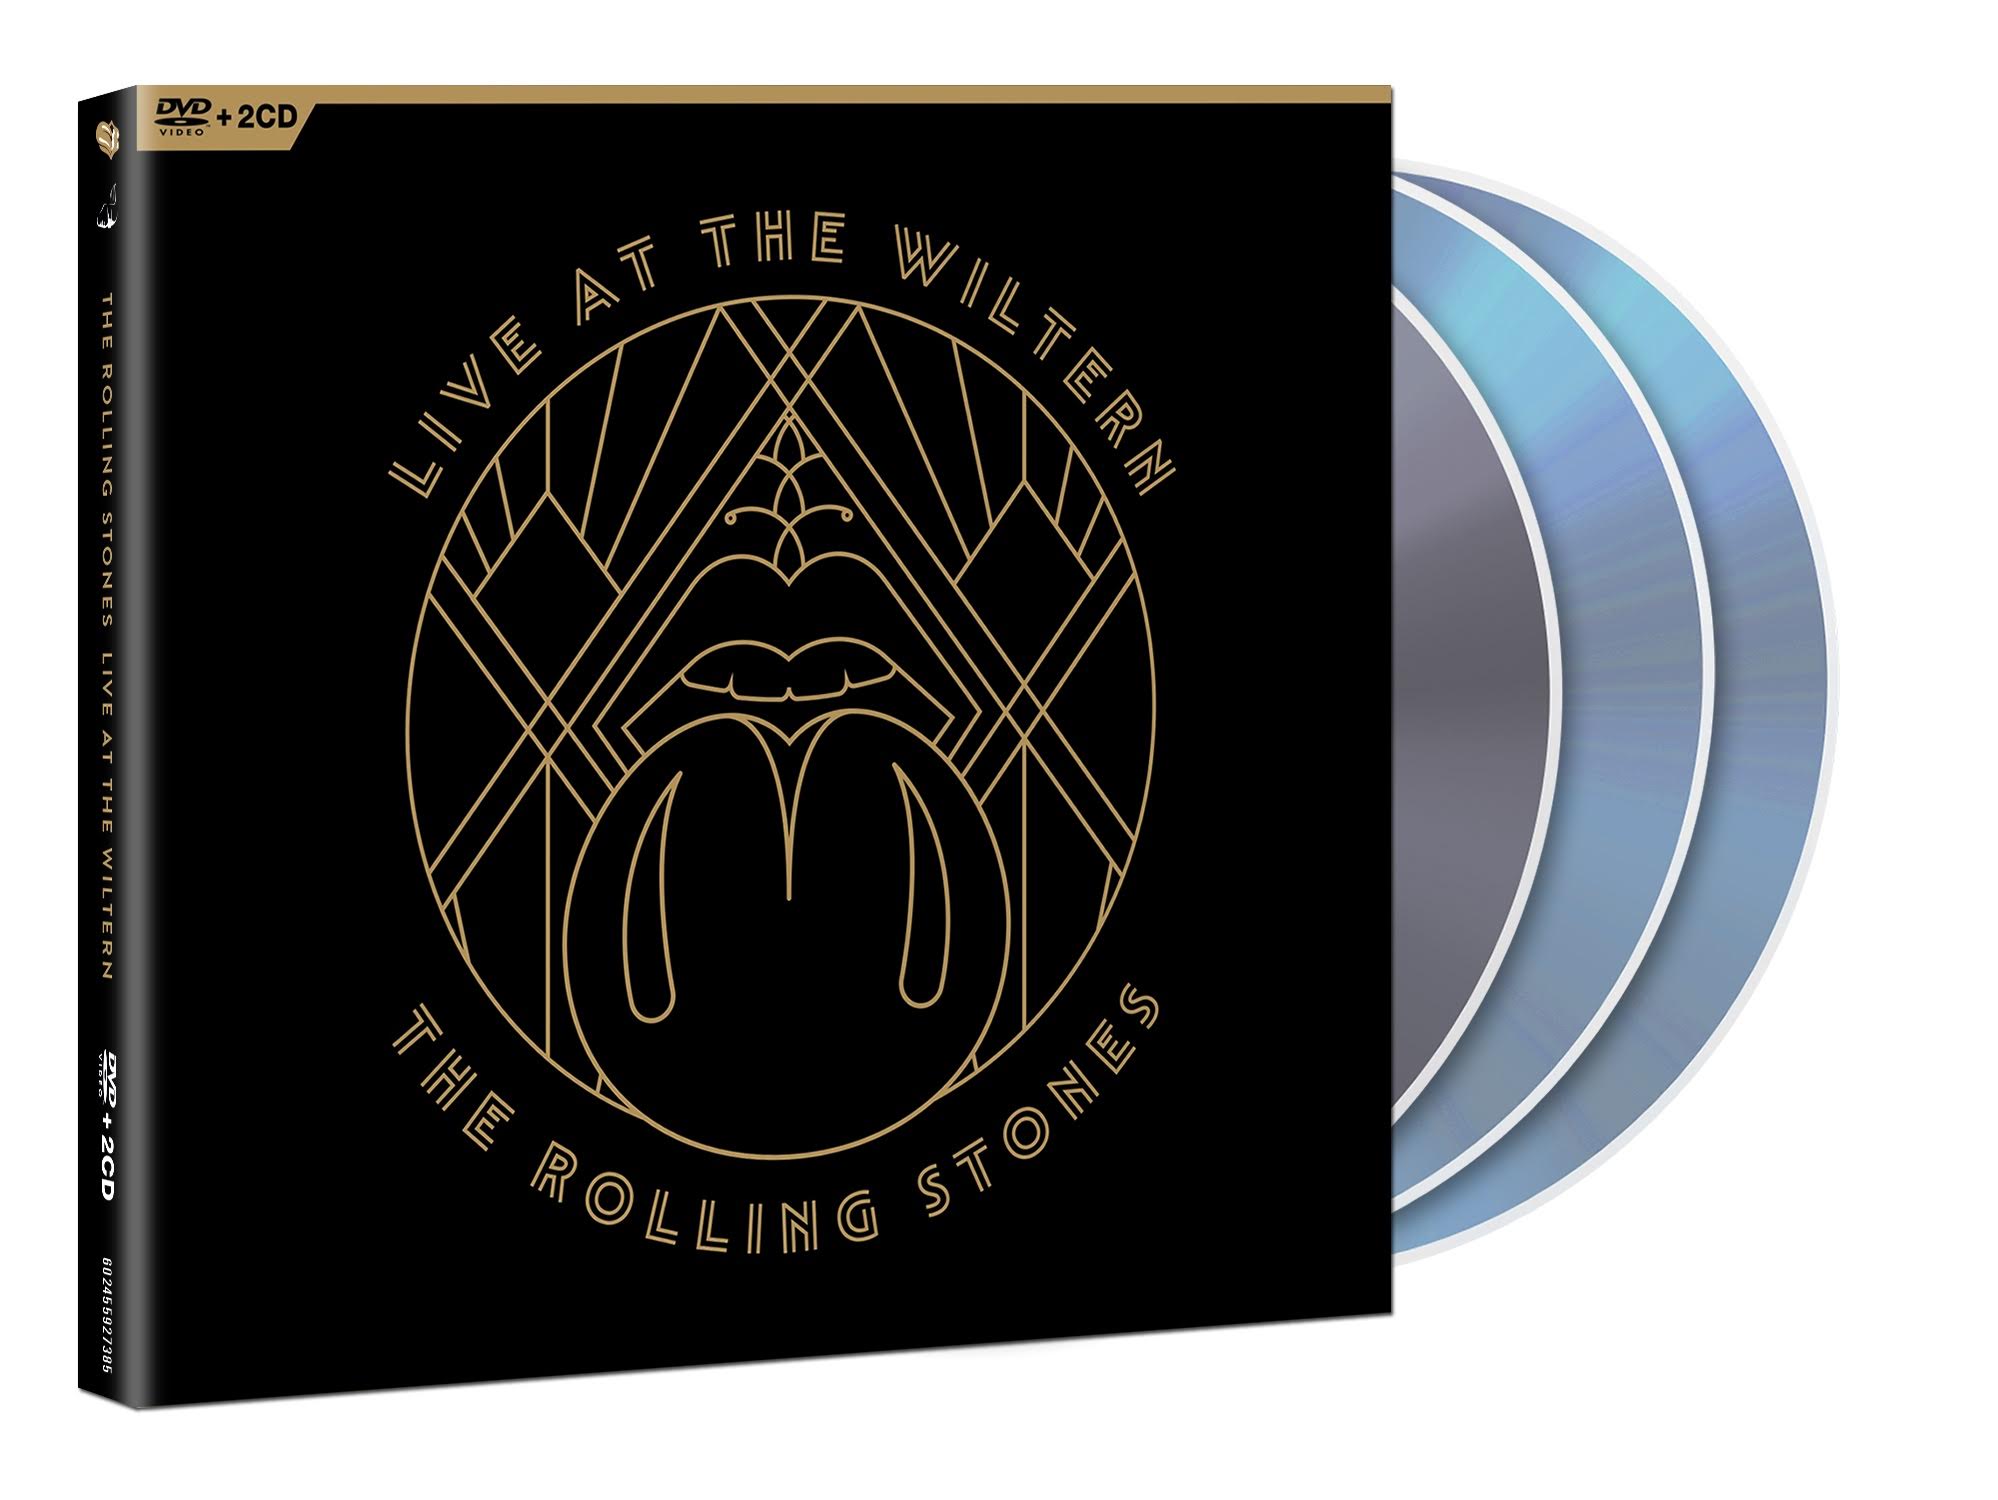 Rolling Stones- Live At The Wiltern (2CD+DVD) (PREORDER)